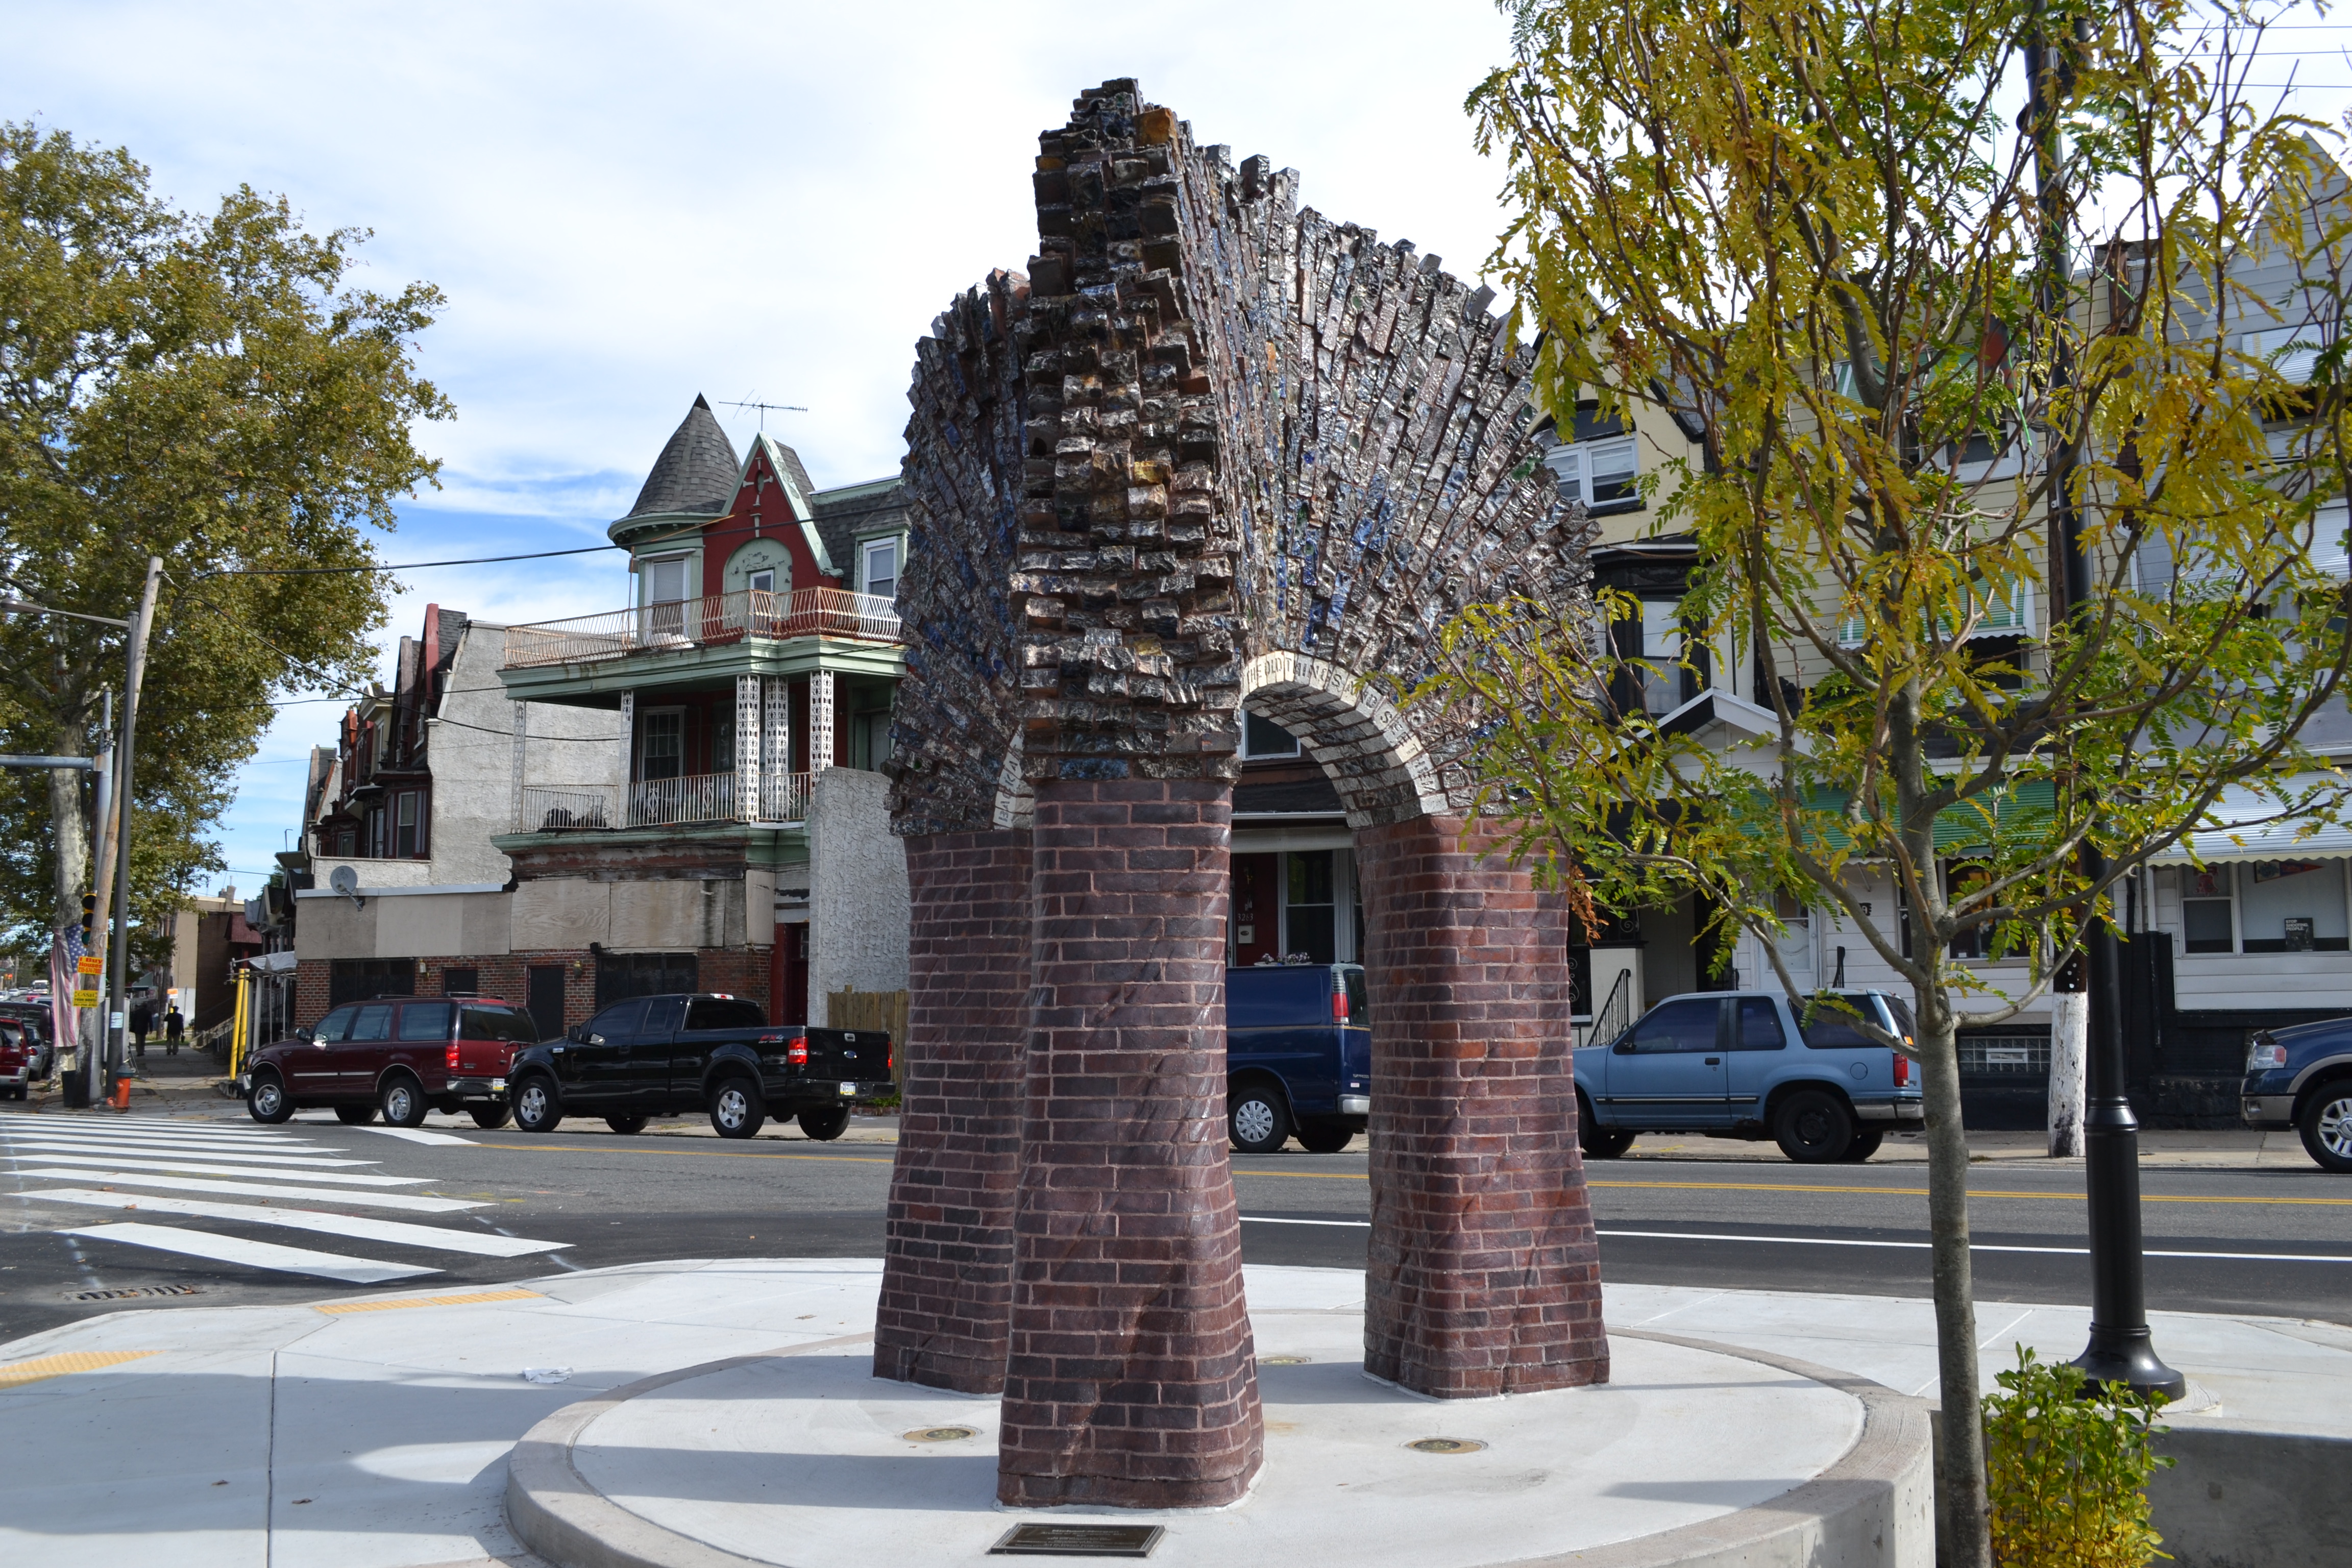 The Arches of Resurgence Art in Transit installation stands at the intersection of the park, bus loop and community